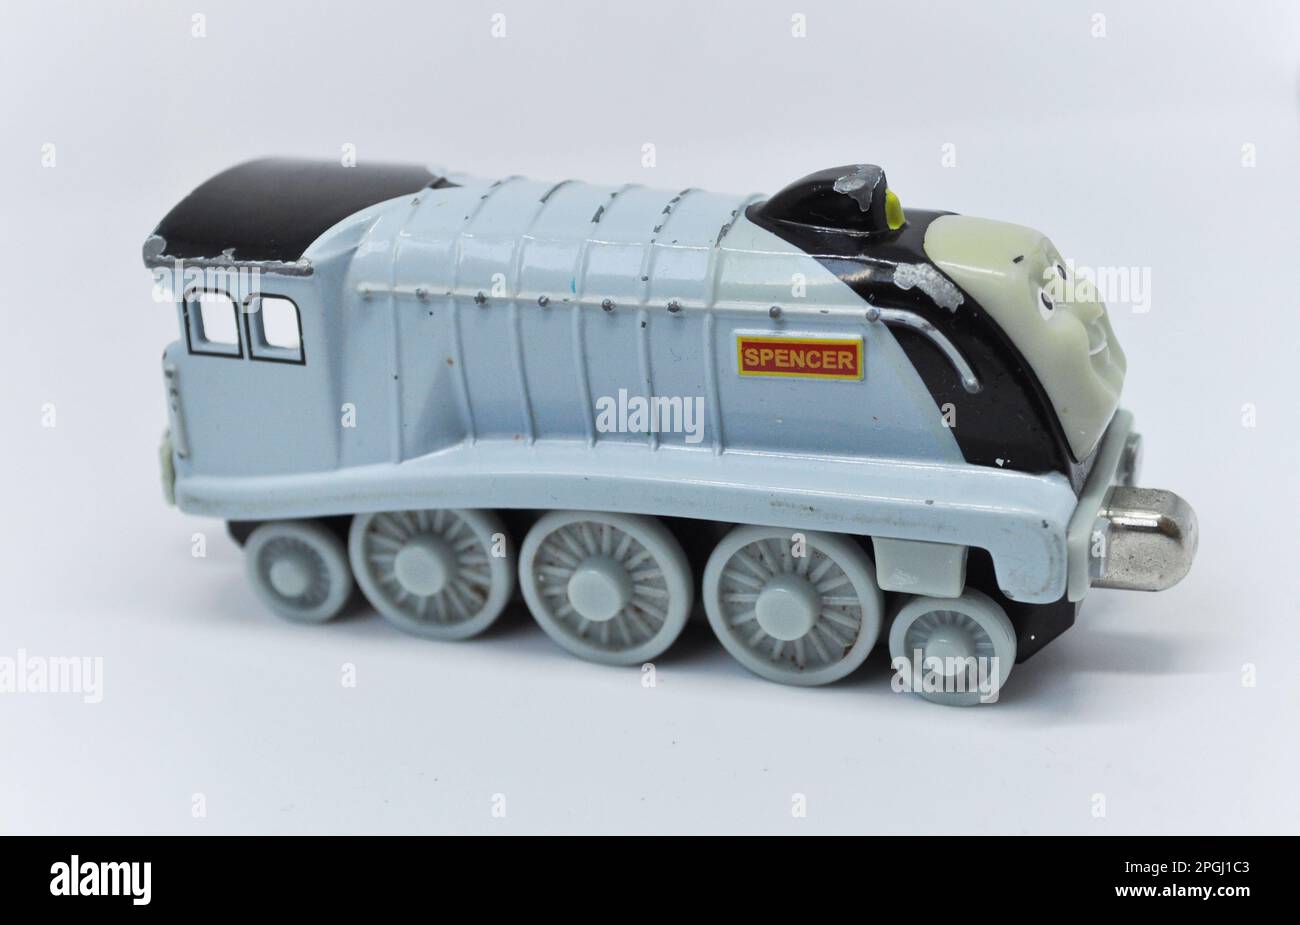 A die cast model of Spencer from the Thomas the Tank Engine series set against a white background Stock Photo